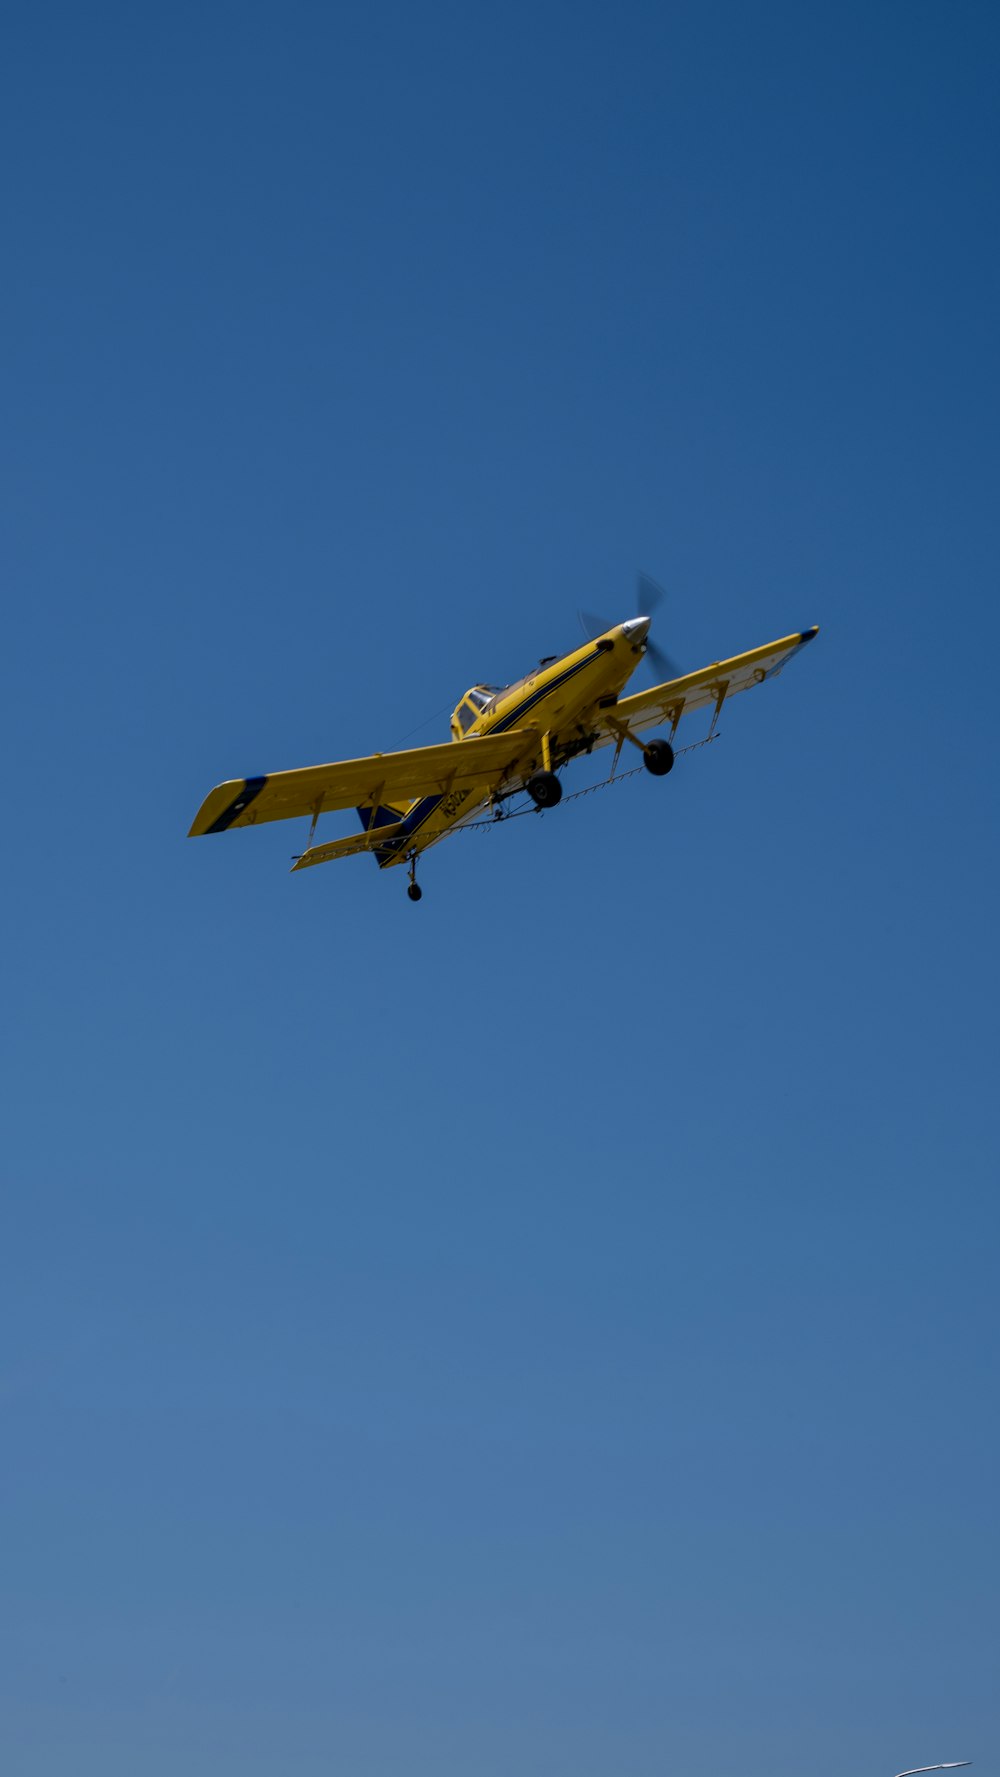 a yellow plane flying in the sky